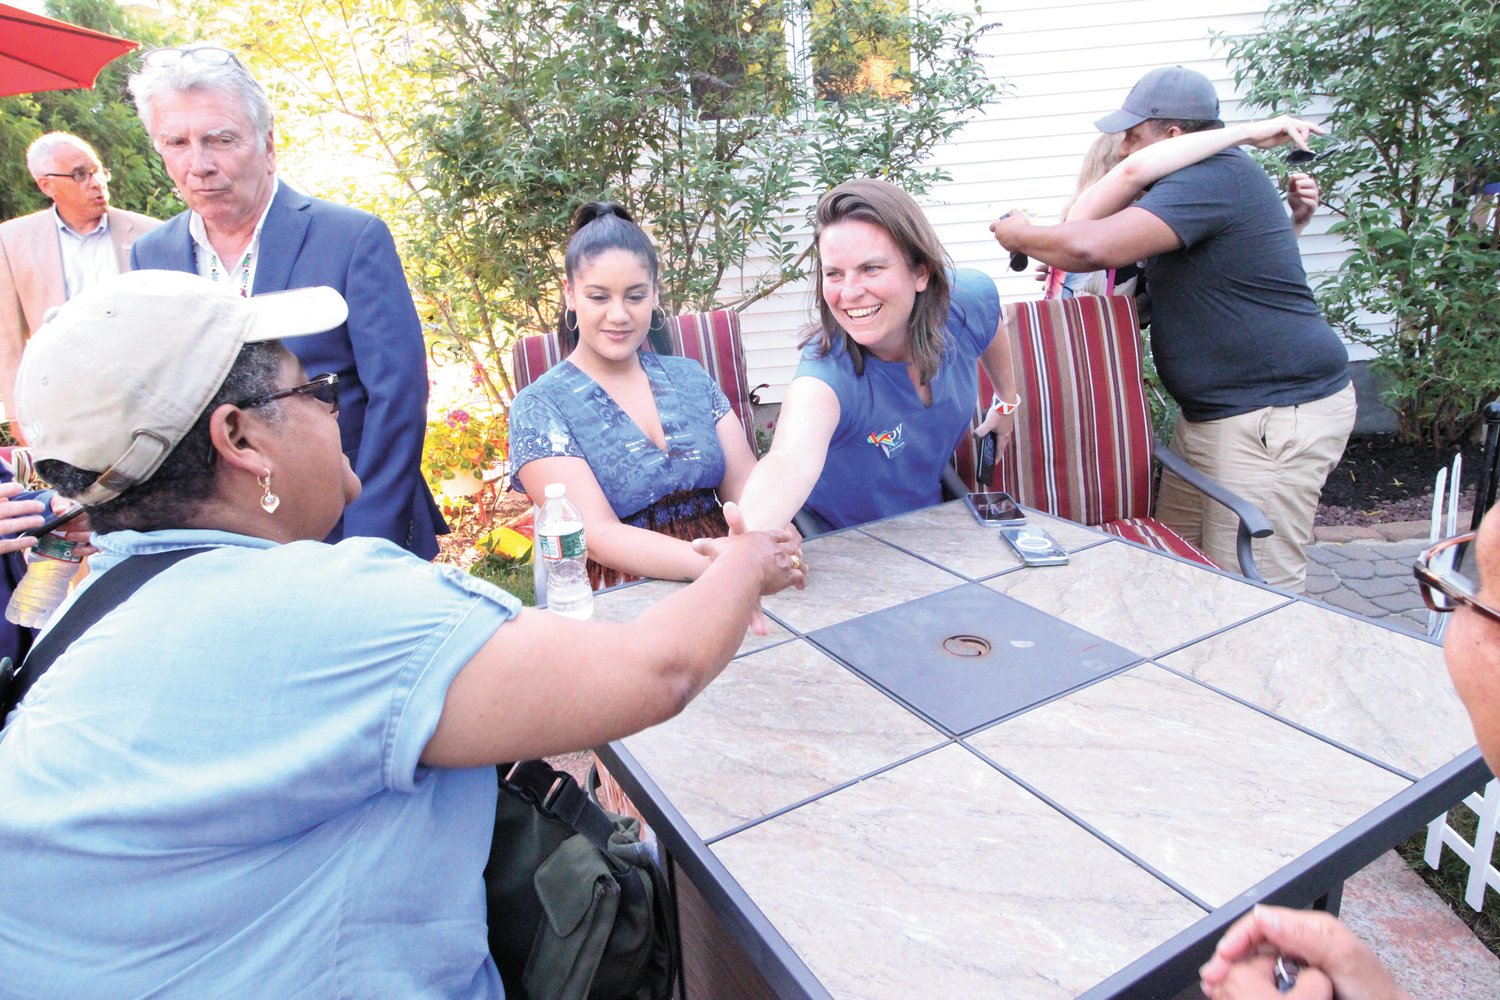 TABLE REACH: Second Congressional District Democratic candidate Joy Fox greets people after arriving at the Latino Public Radio BBQ  held Saturday at the station in Cranston. (Cranston Herald photos)